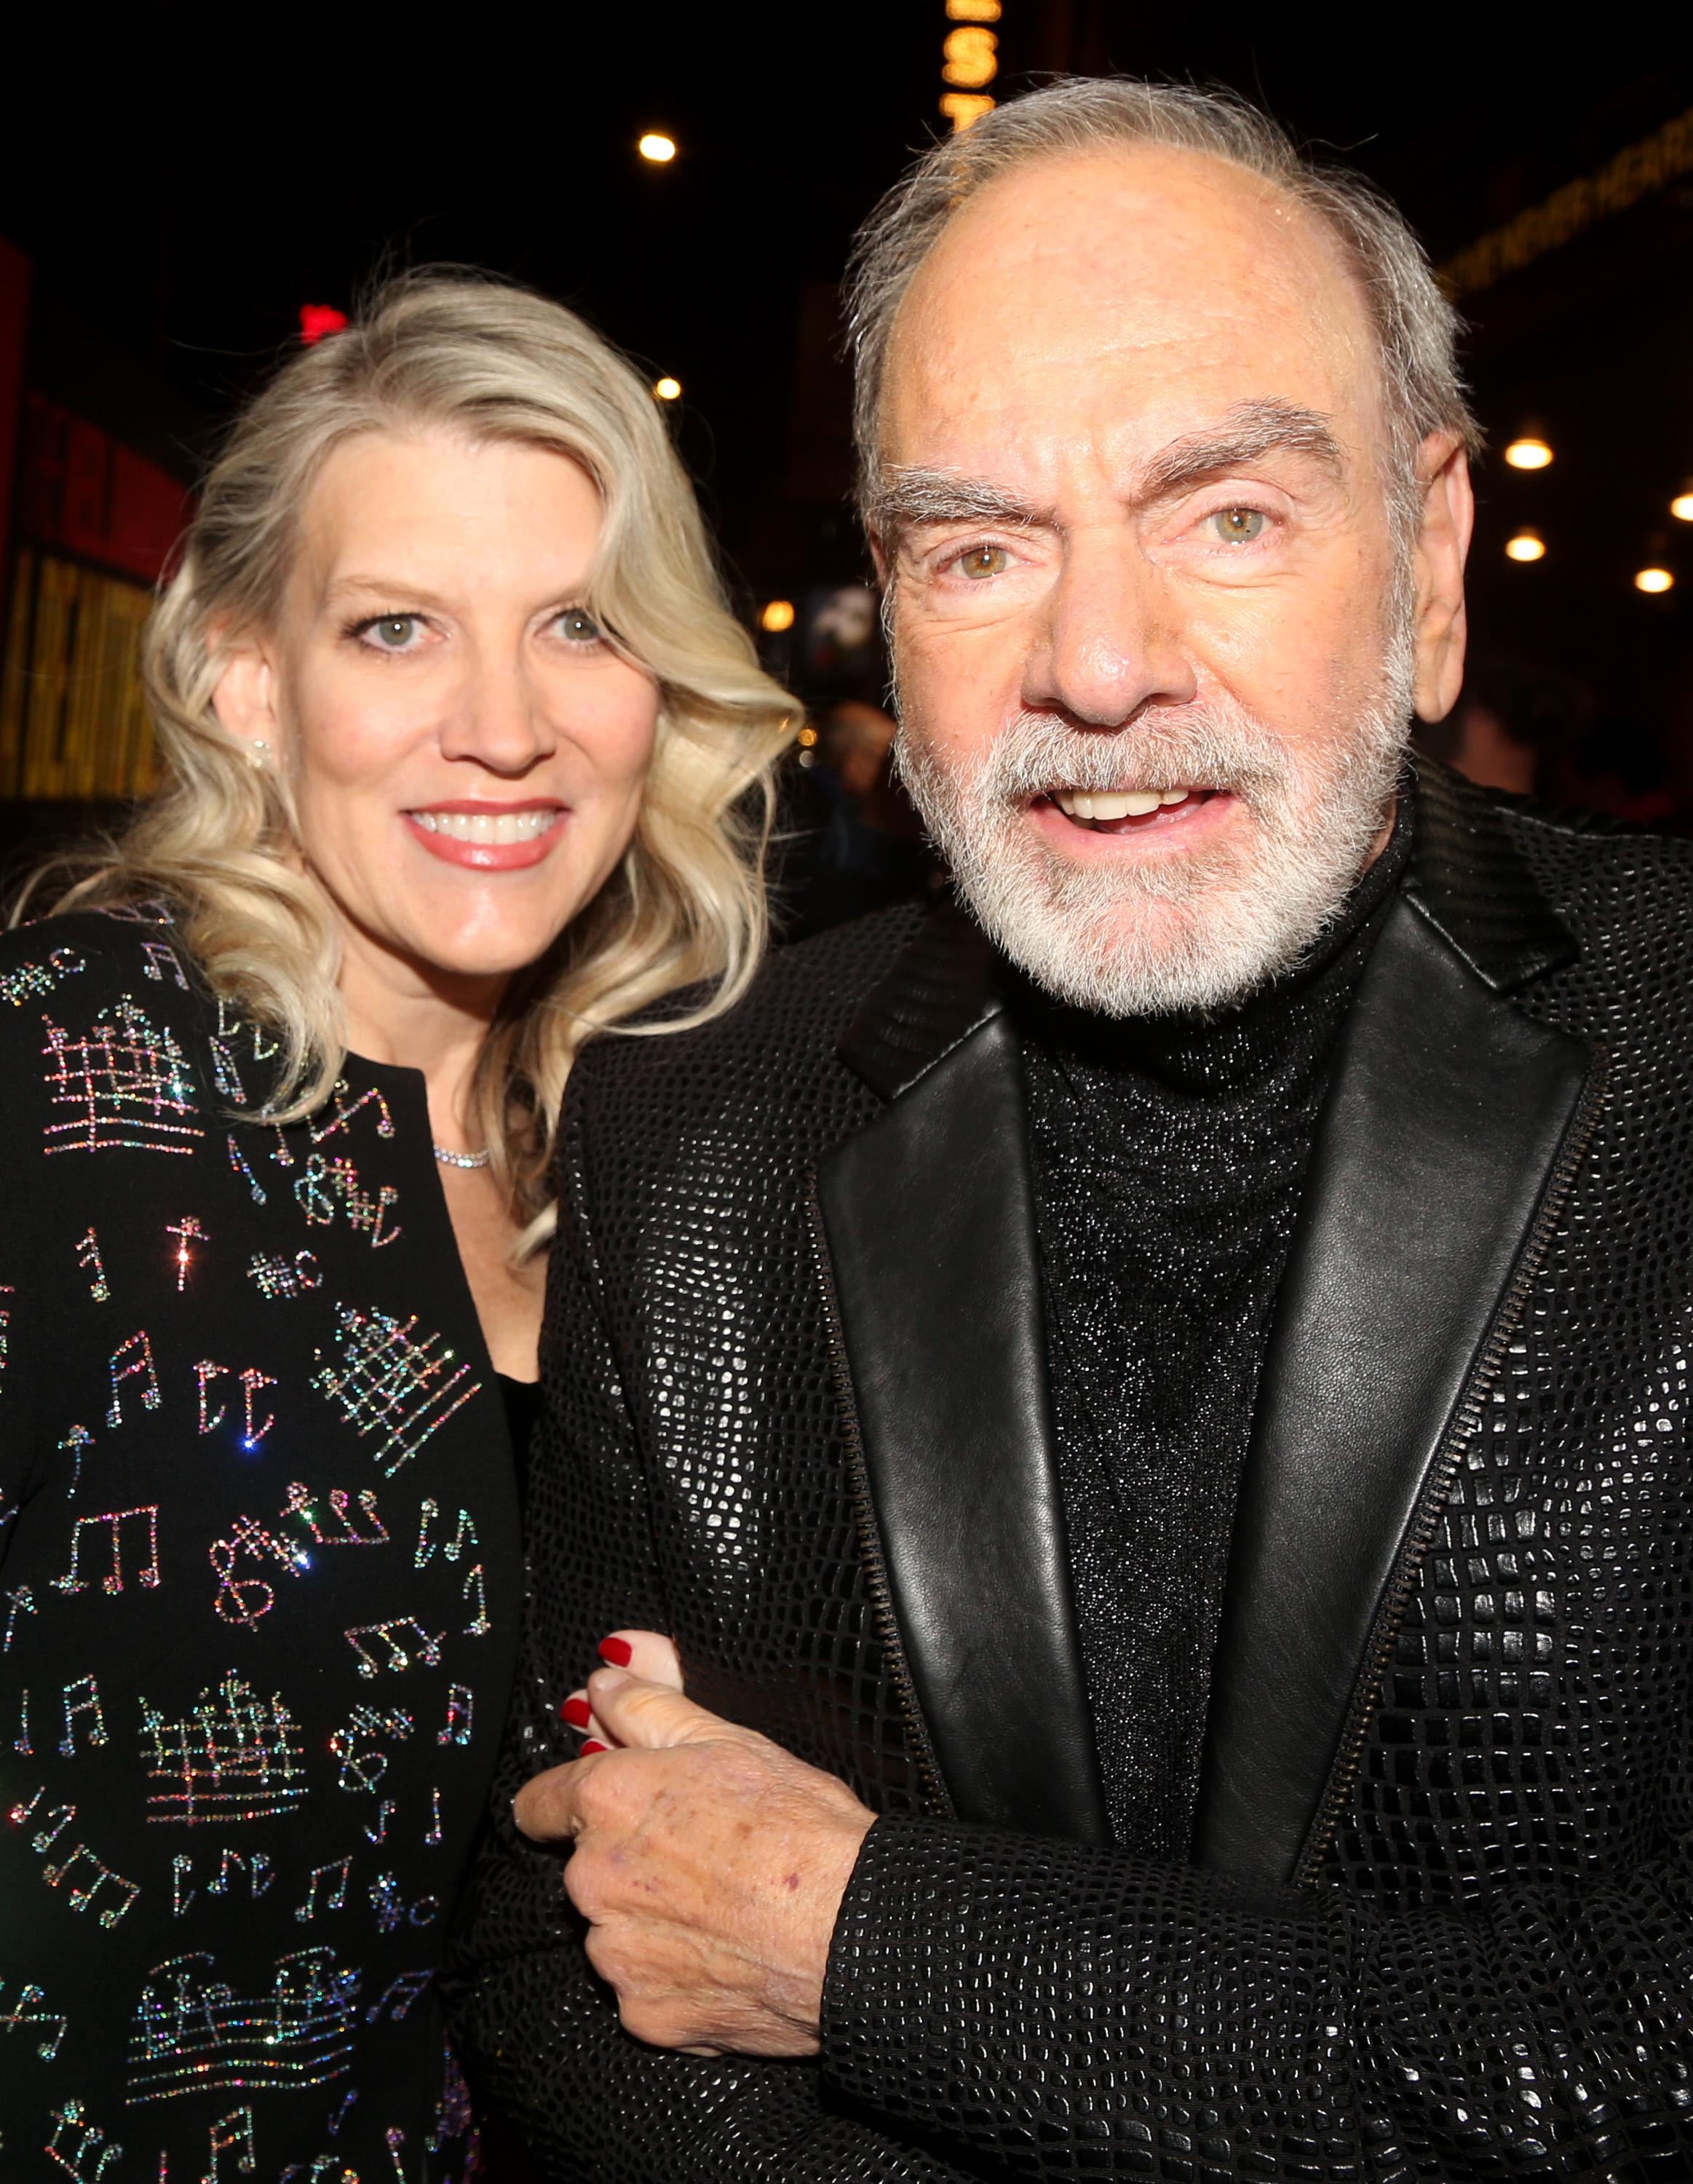 Talent manager Katie McNeil and Neil Diamond during the opening night of the Neil Diamond musical "A Beautiful Noise" on Broadway at The Broadhurst Theater on December 4, 2022 in New York City | Source: Getty Images